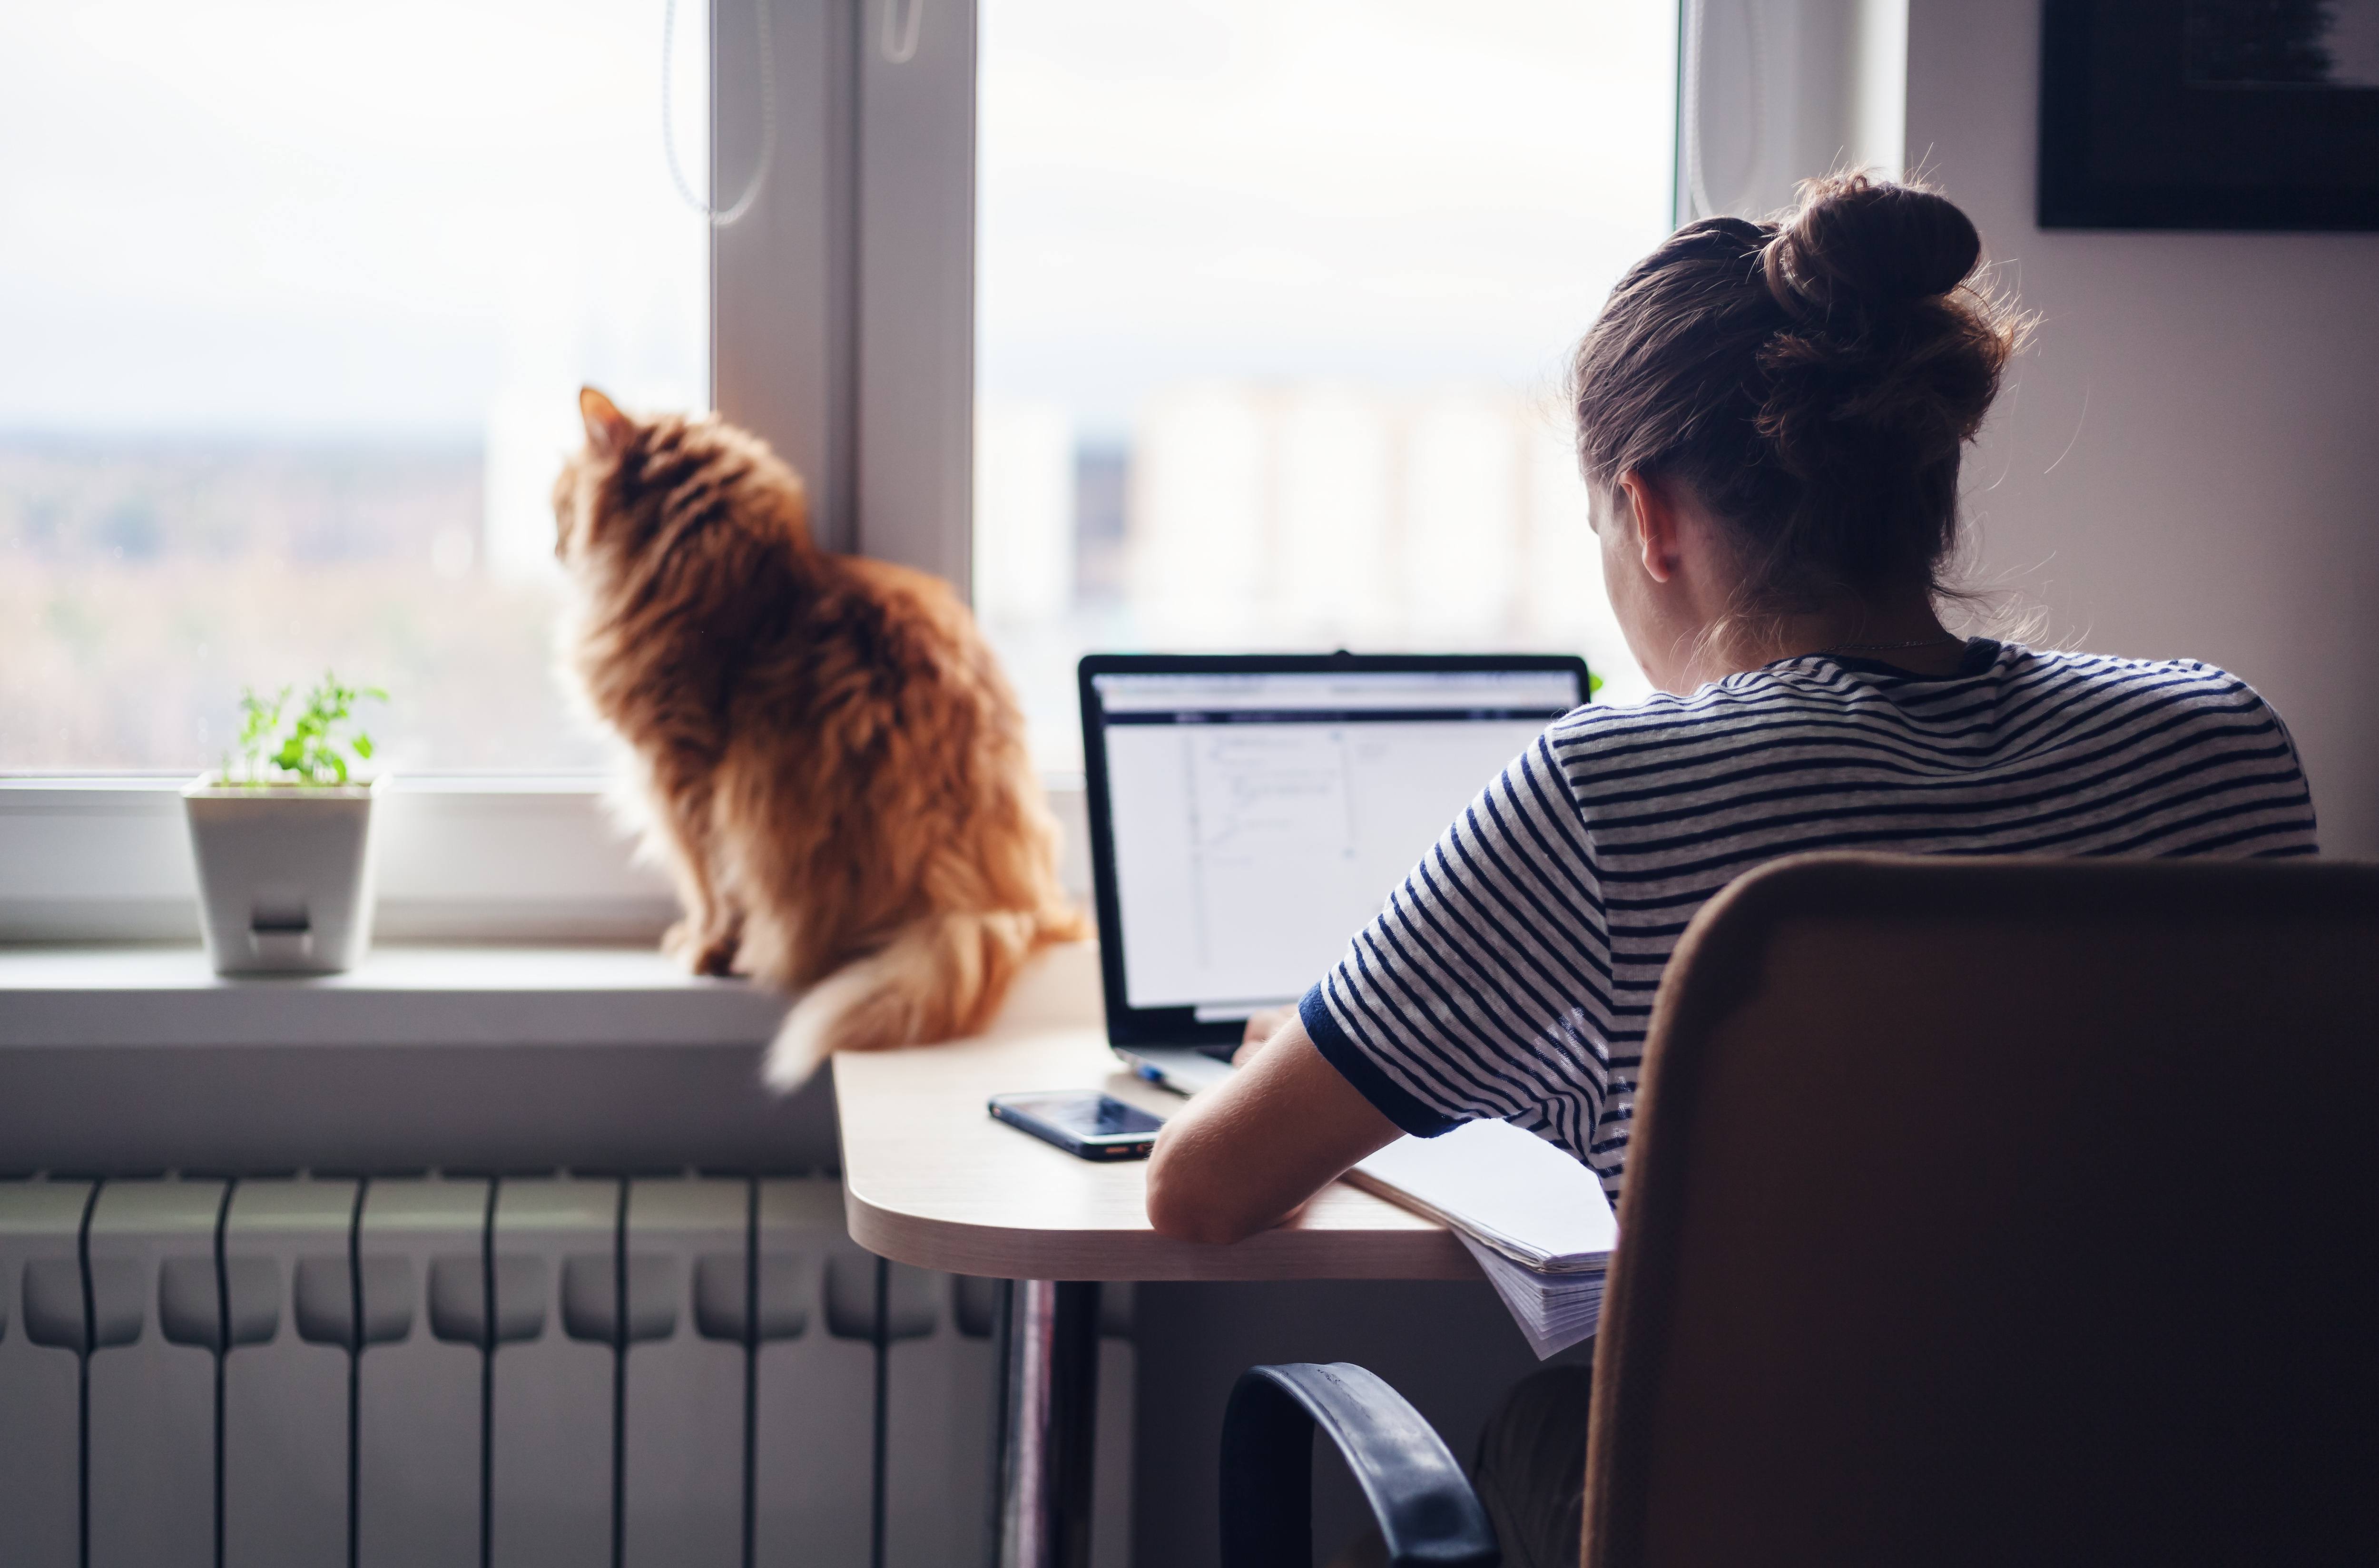 Image shot from behind of female sat at a desk. She is working on a laptop whilst a ginger cat sits on the windowsill and looks out of the window.